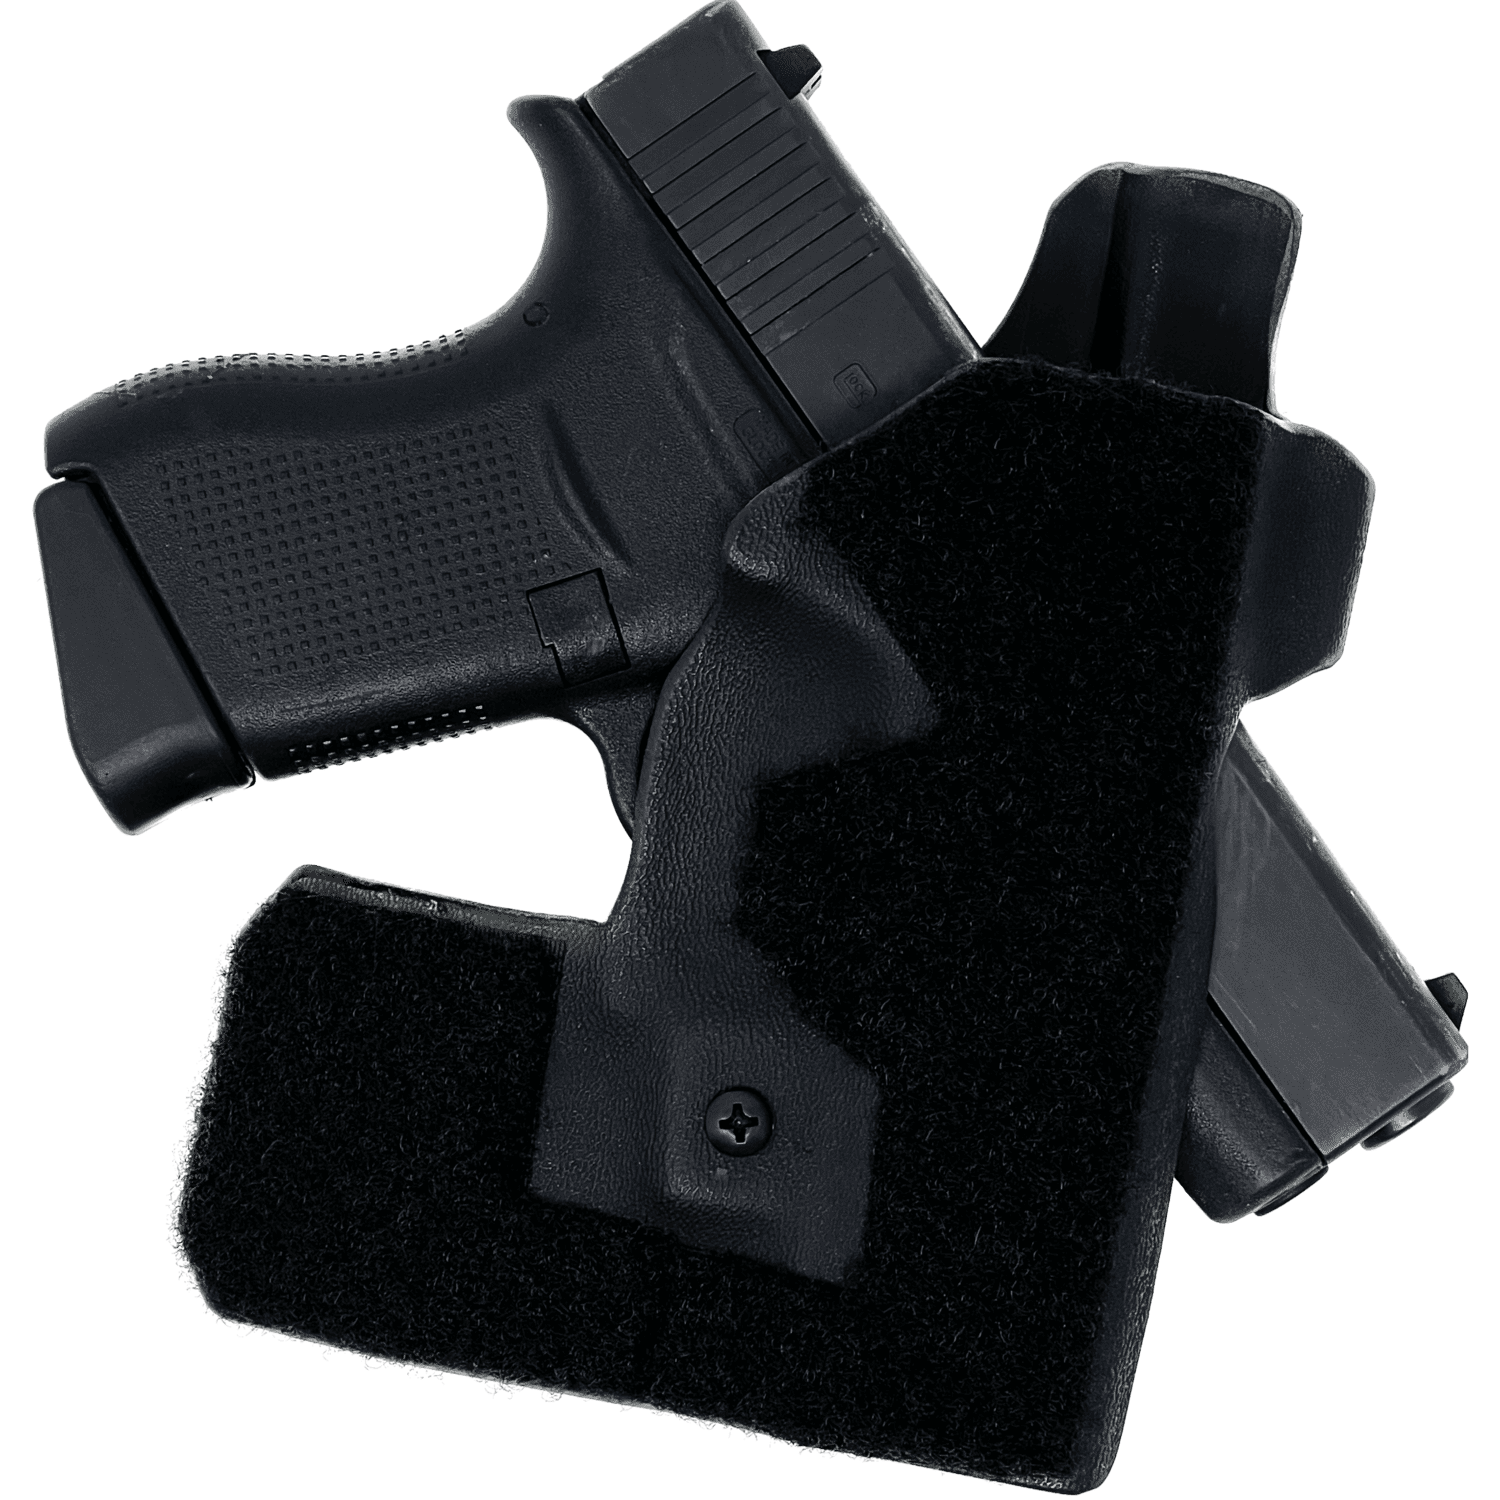 1. Importance of Holsters for Backup Firearms